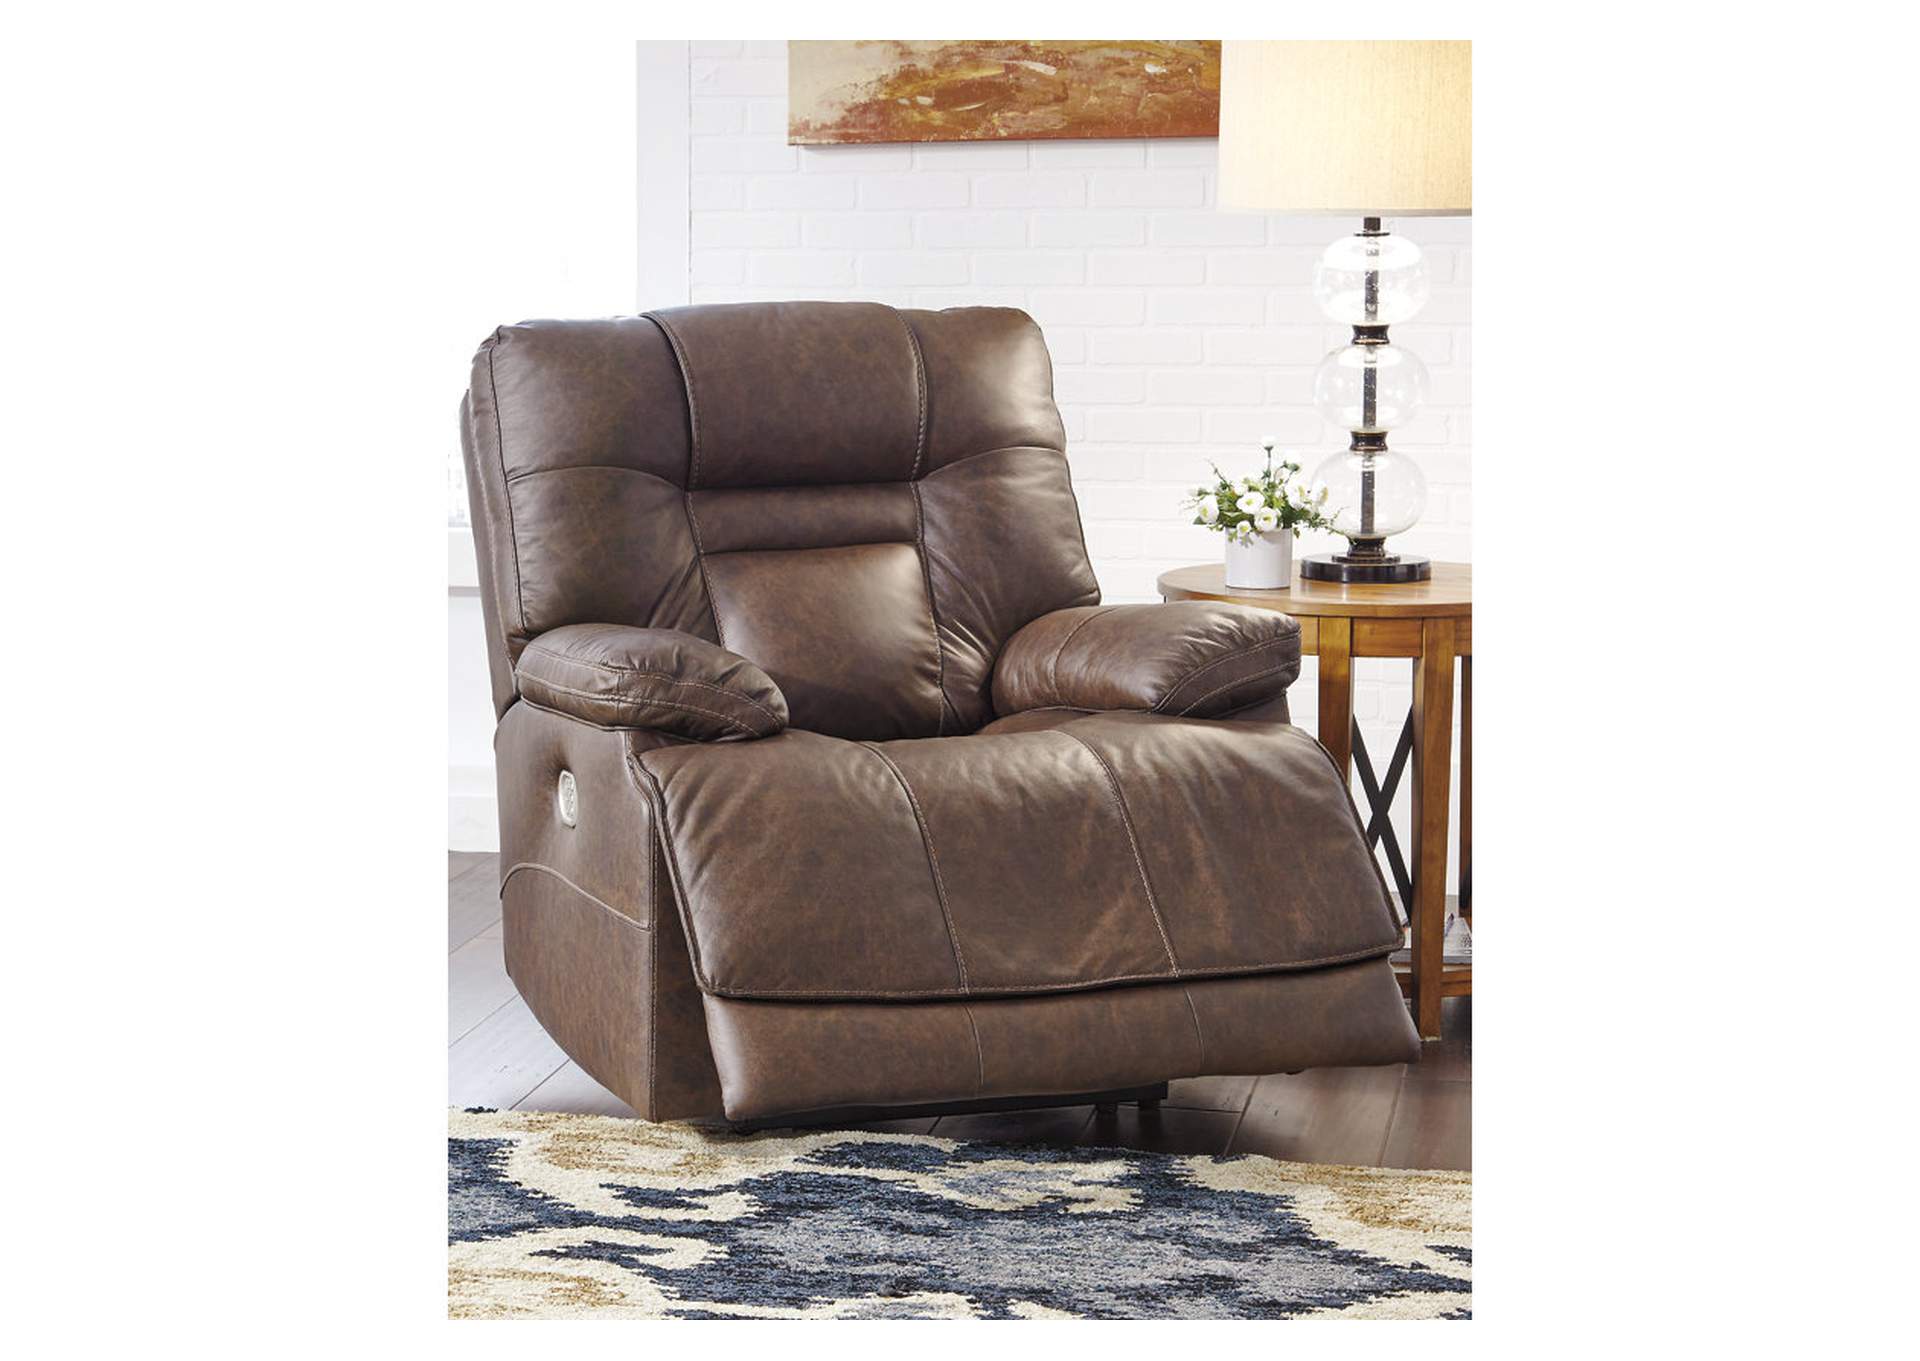 Wurstrow Power Recliner,Signature Design By Ashley